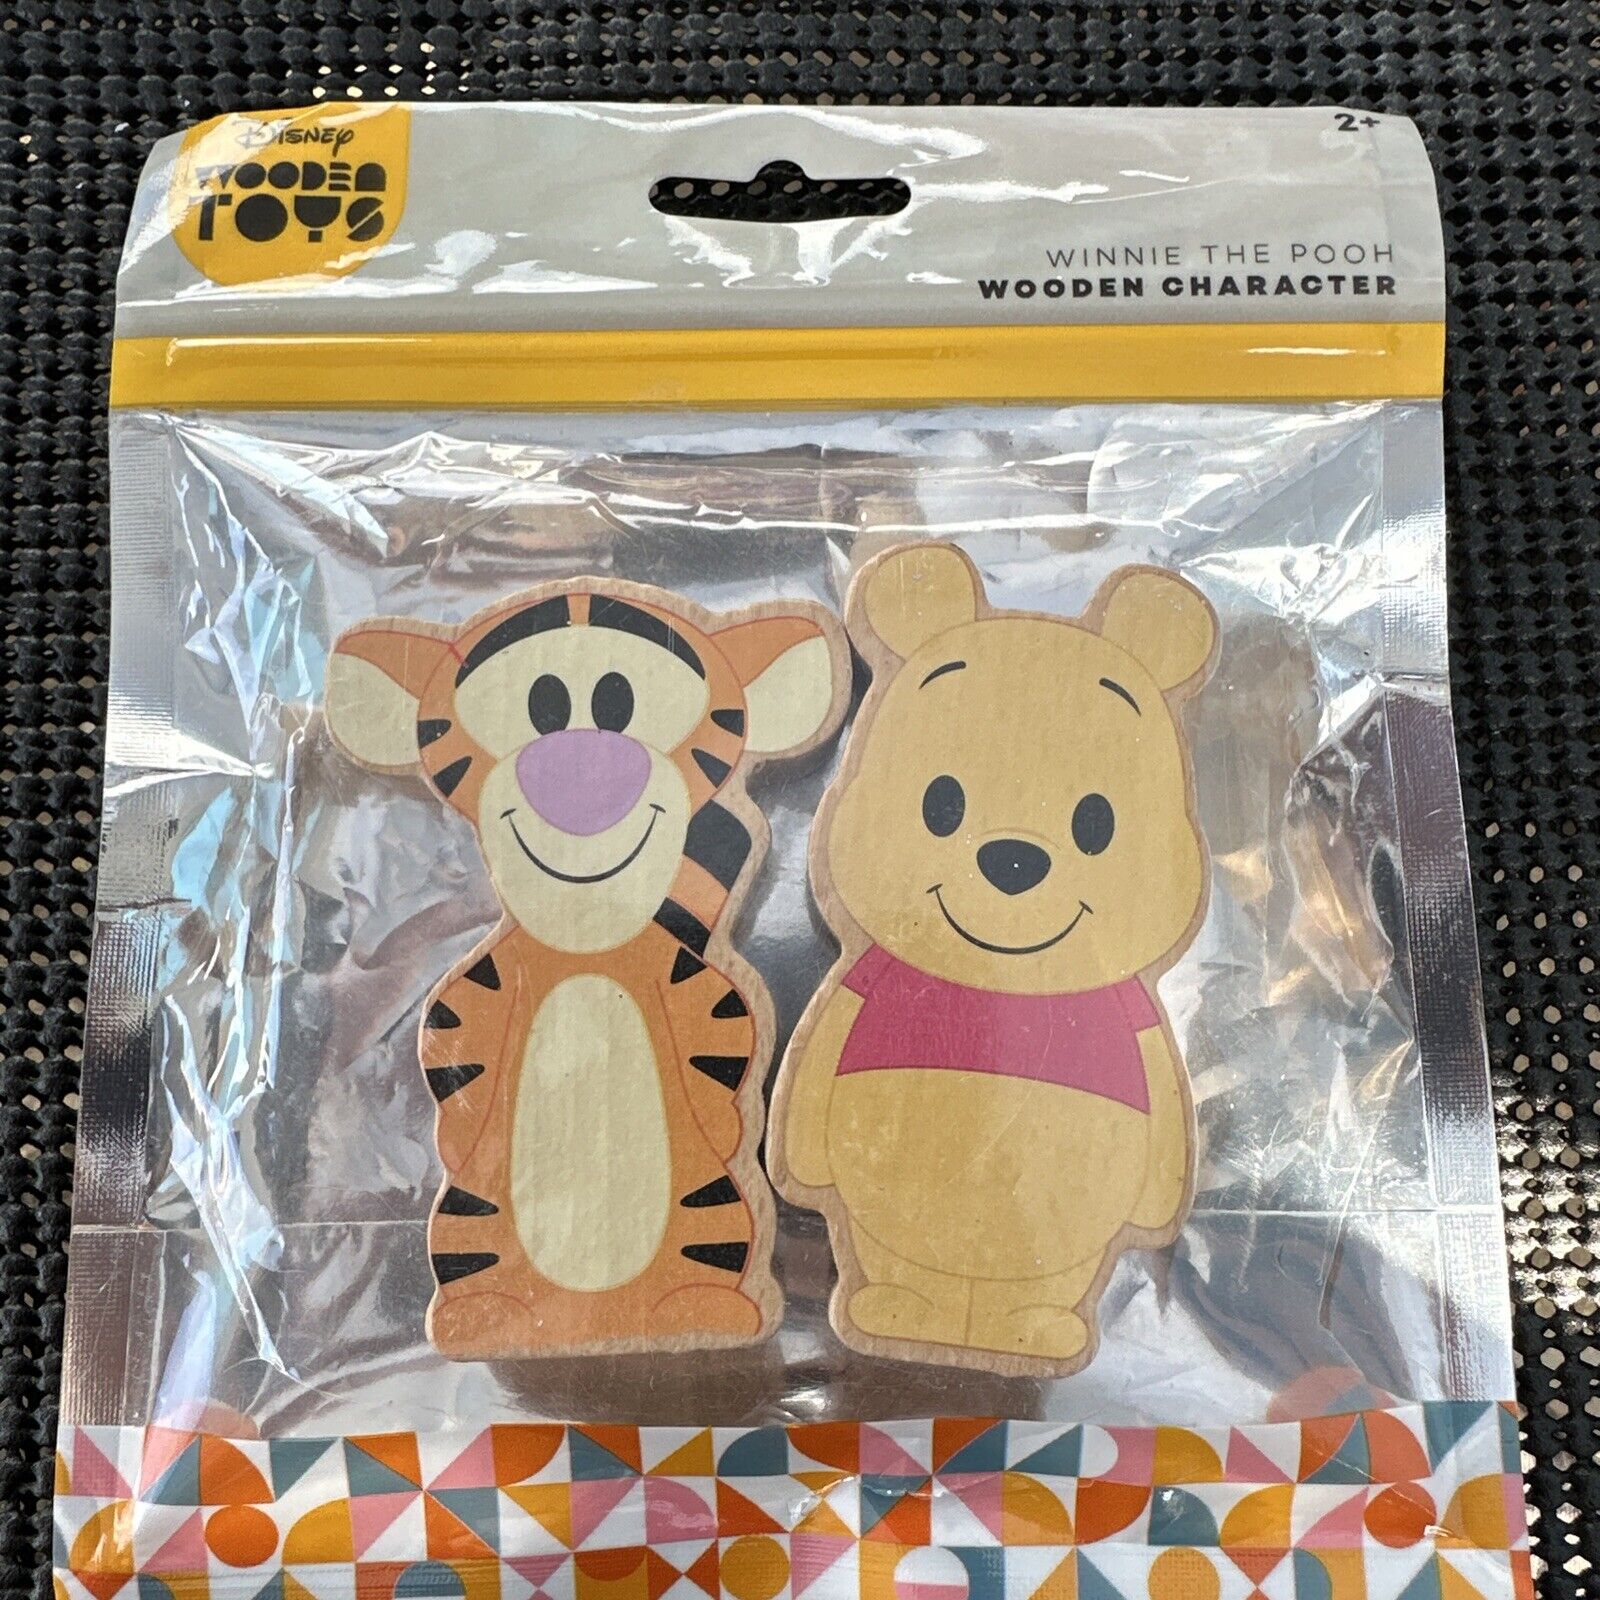 Disney Just Play Wooden Character Winnie The Pooh Tigger Set